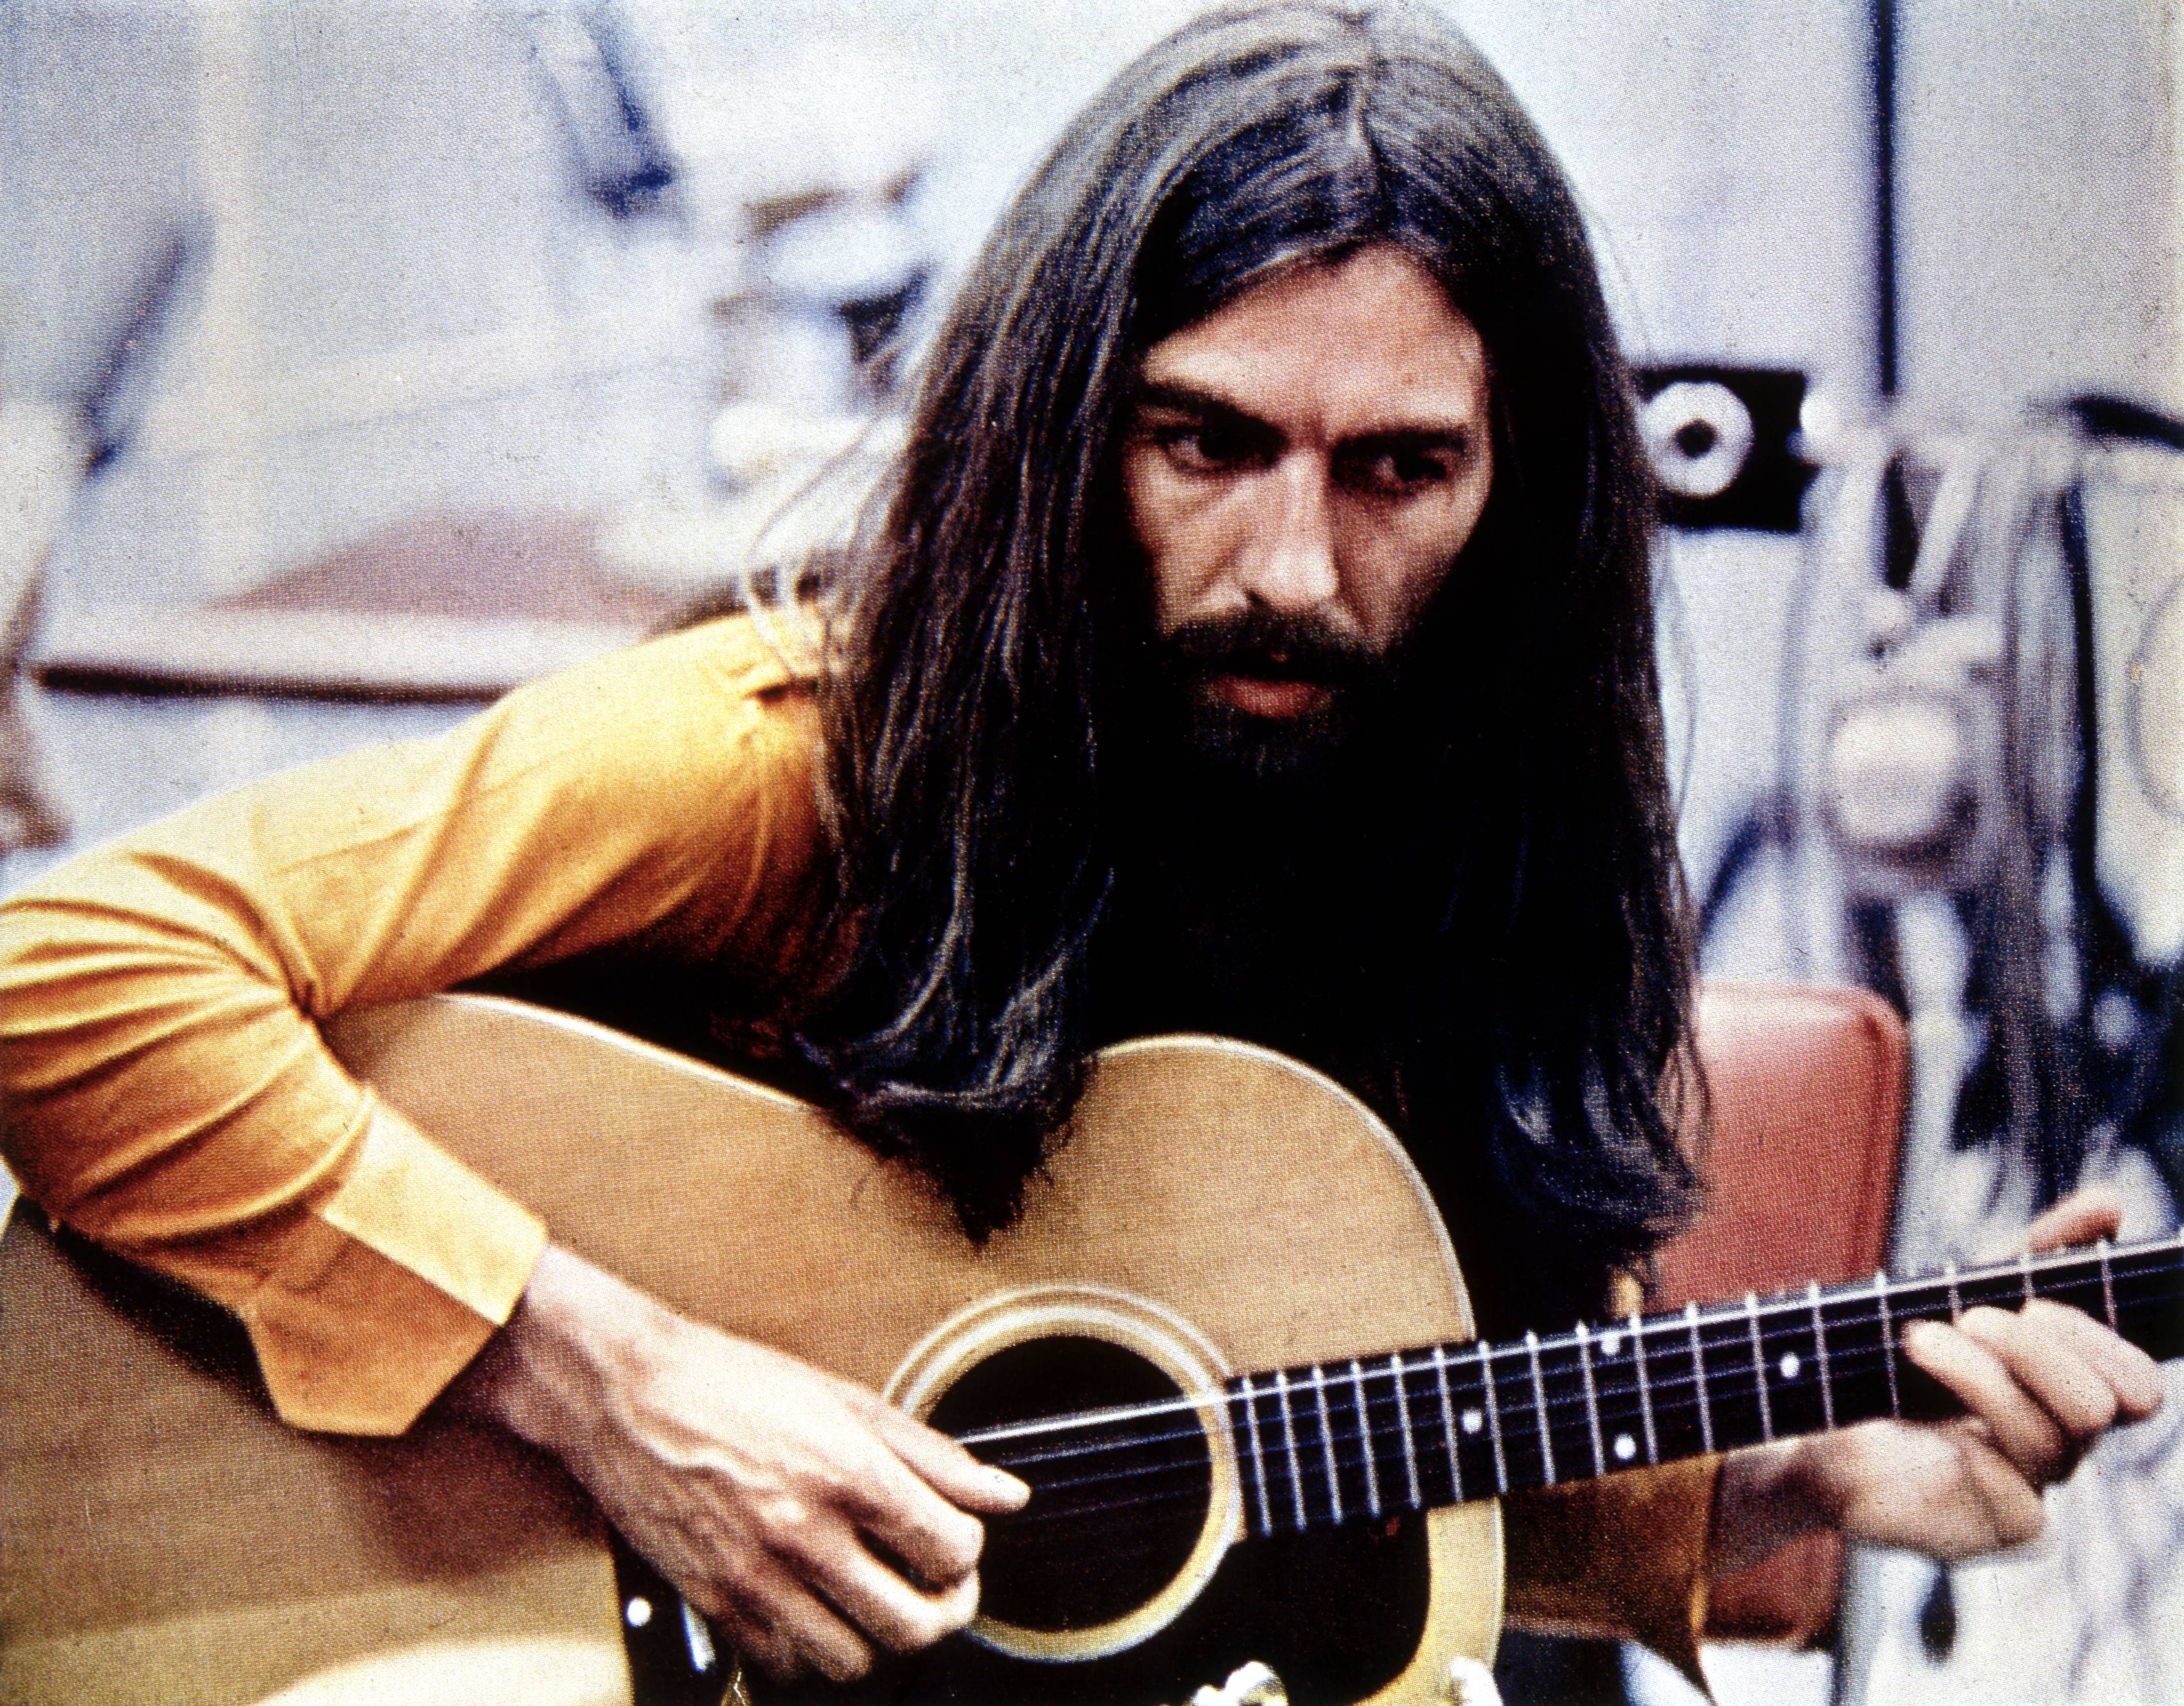 The Beatles' George Harrison holding a guitar